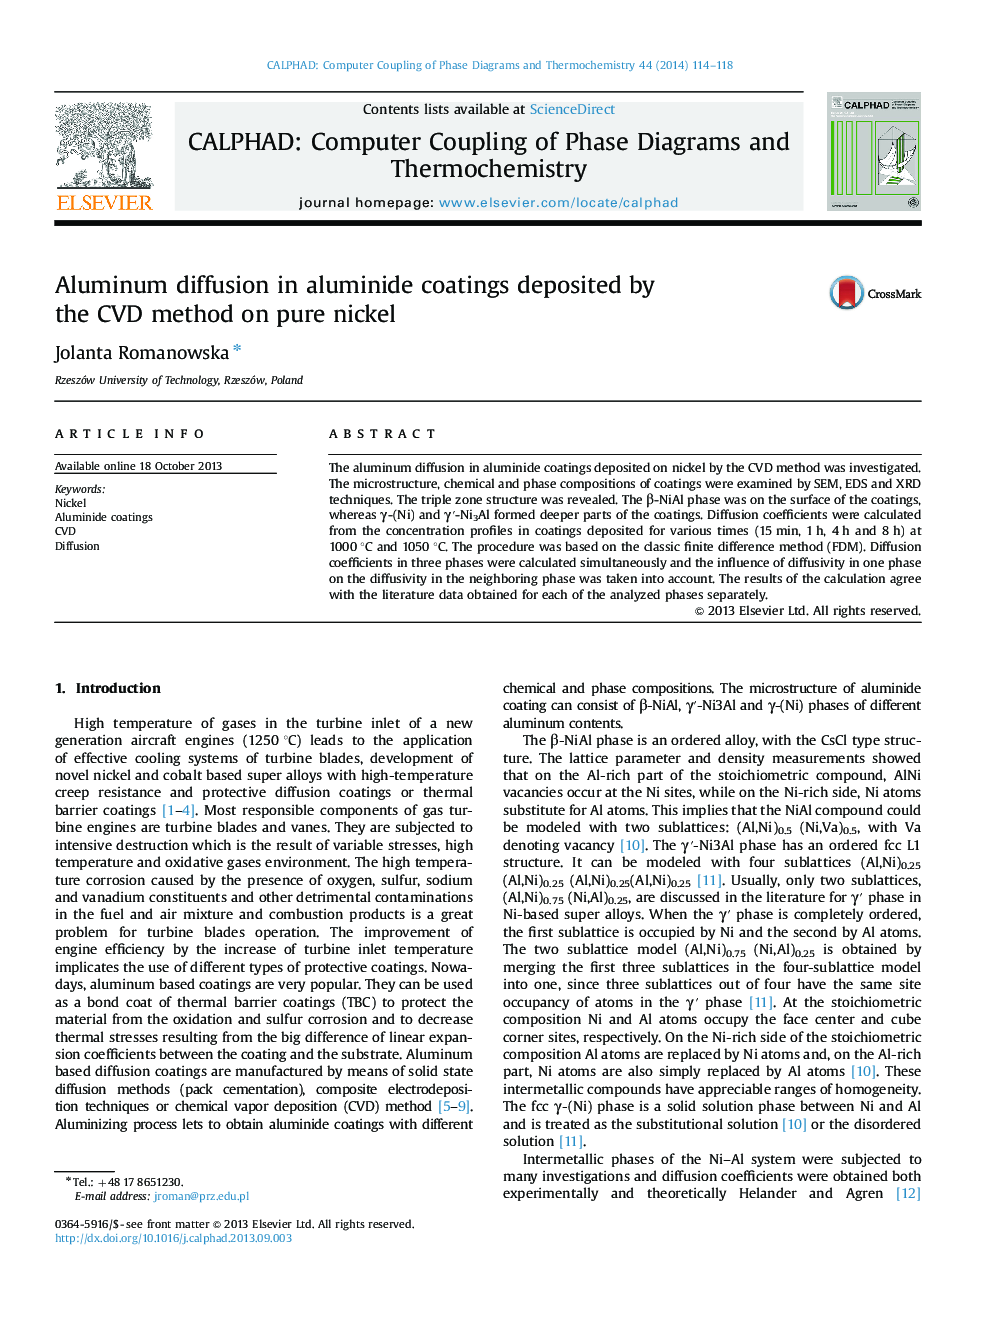 Aluminum diffusion in aluminide coatings deposited by the CVD method on pure nickel